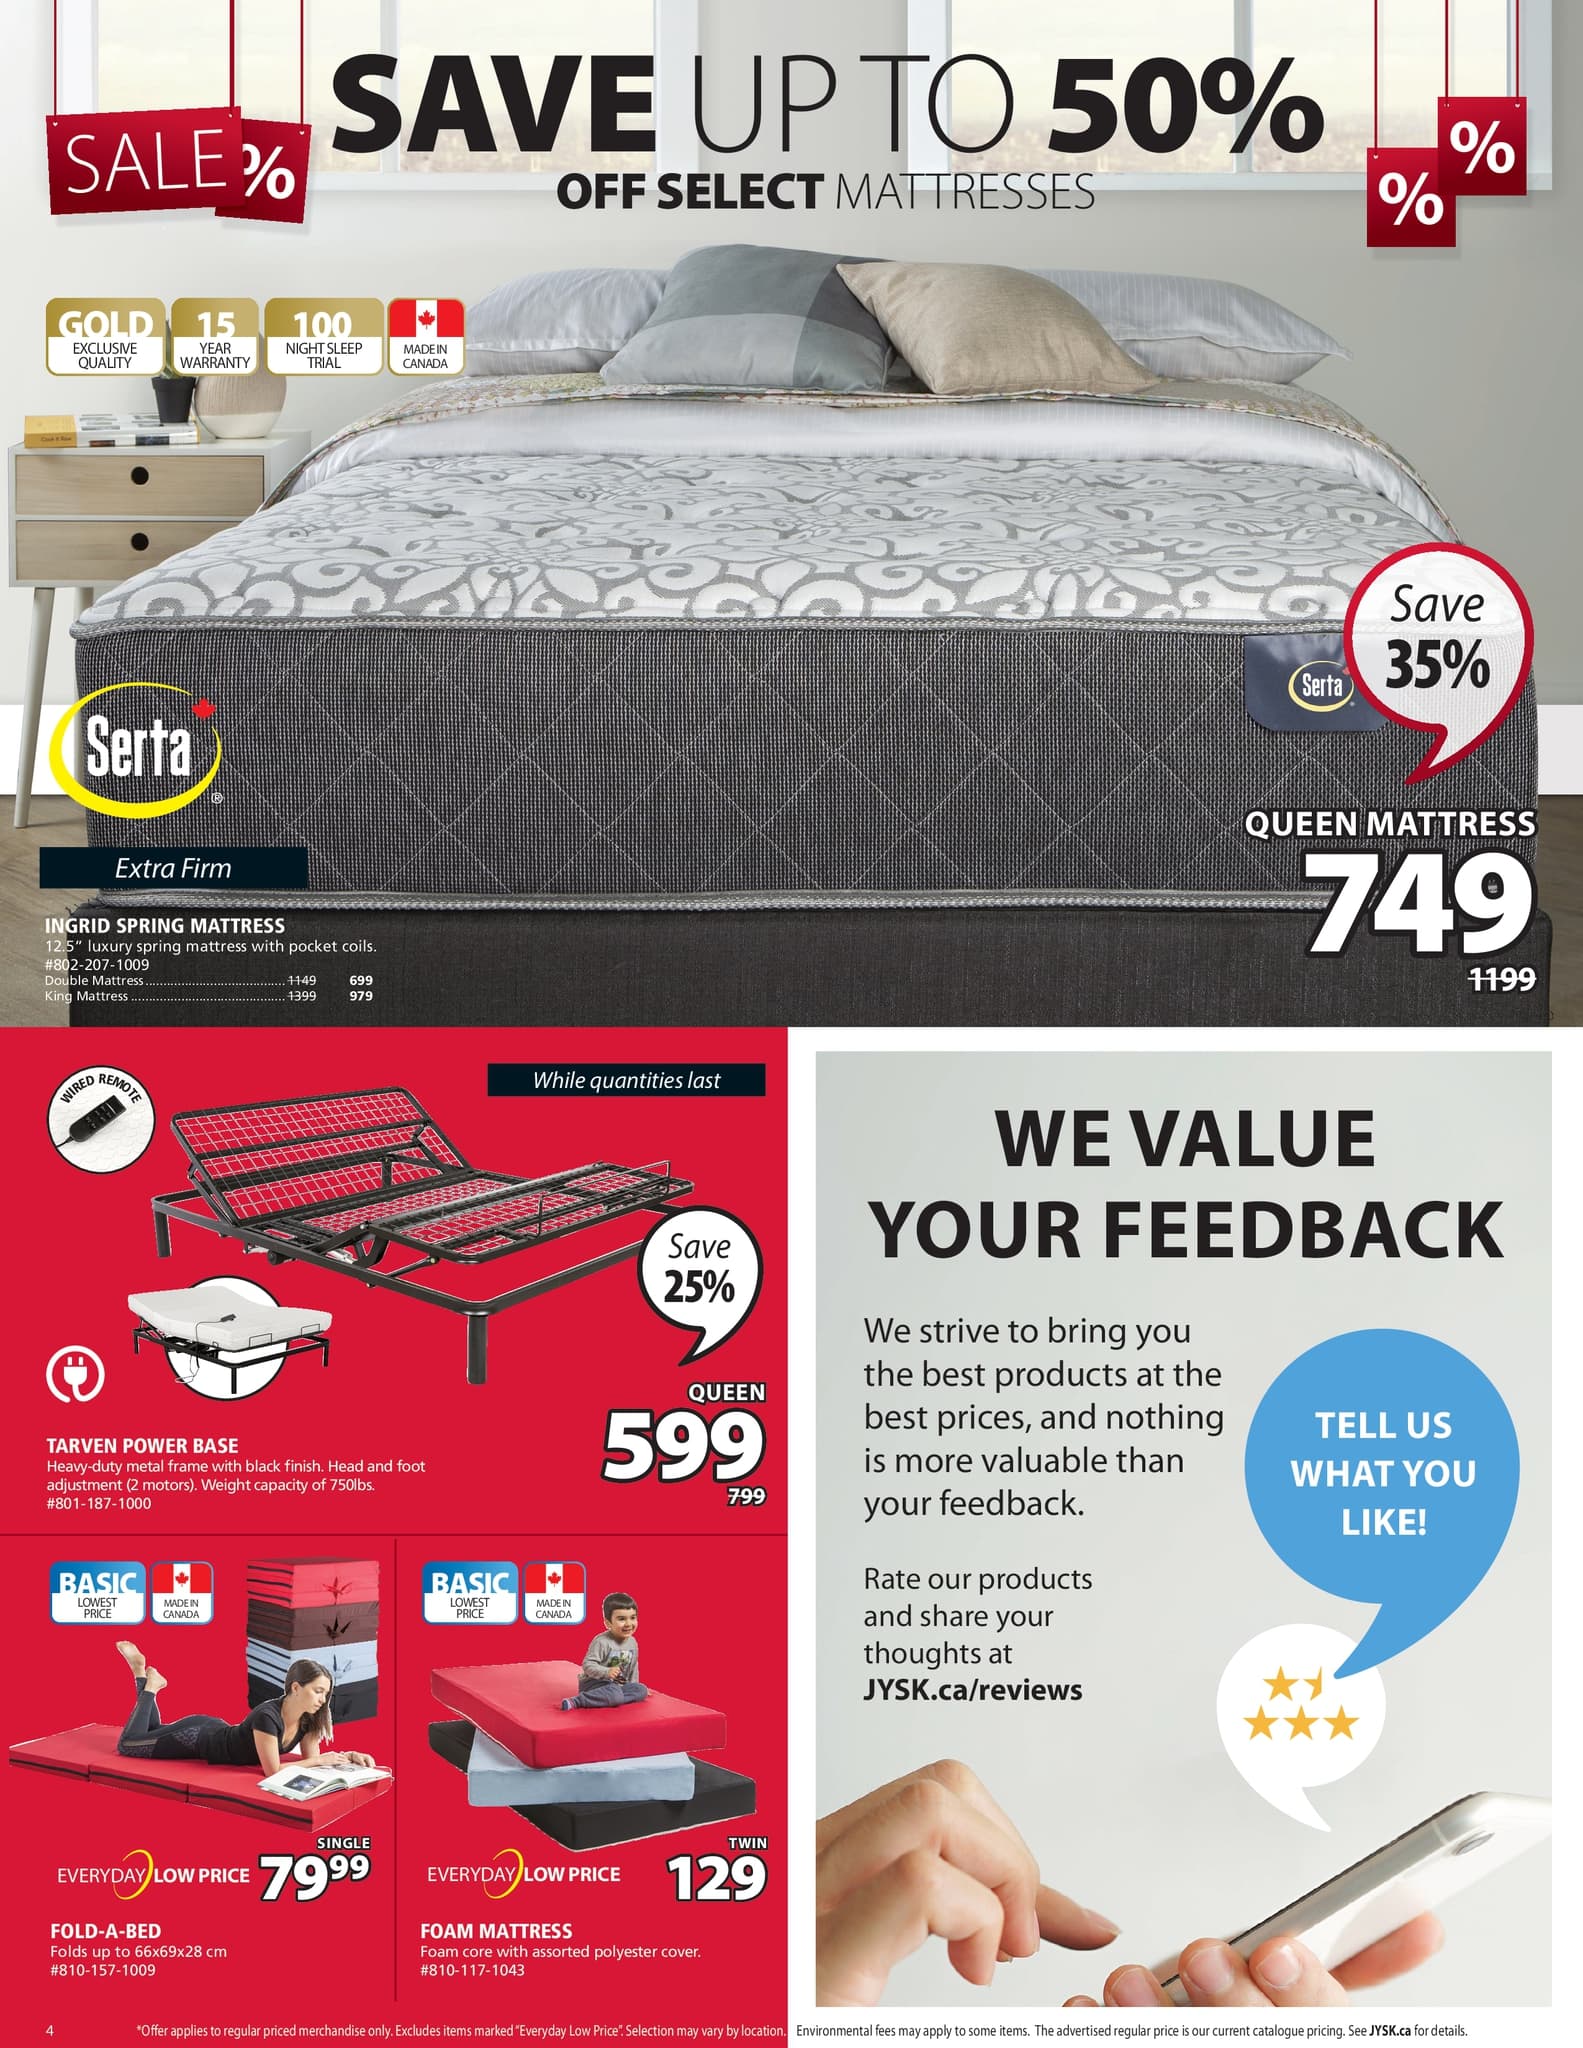 Jysk - Weekly Flyer Specials - Page 4